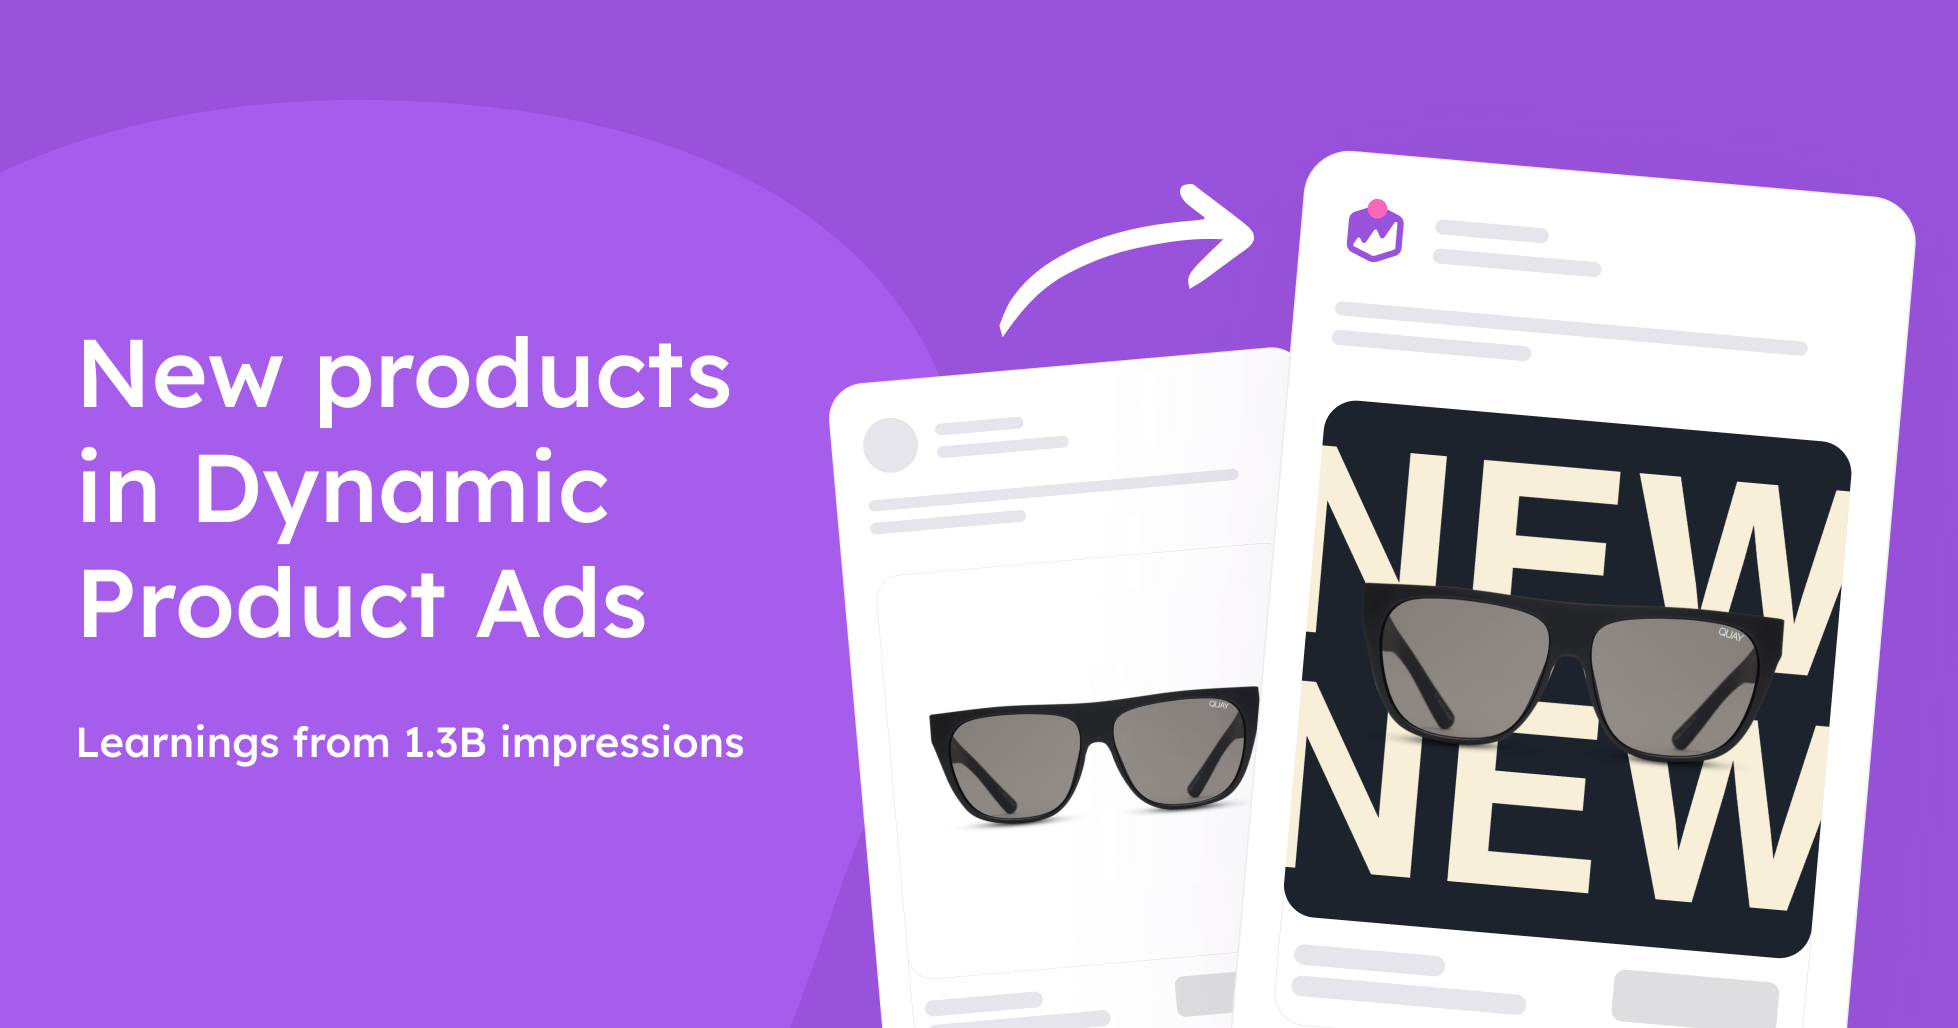 The ultimate guide for showing discounts in Dynamic Product Ads